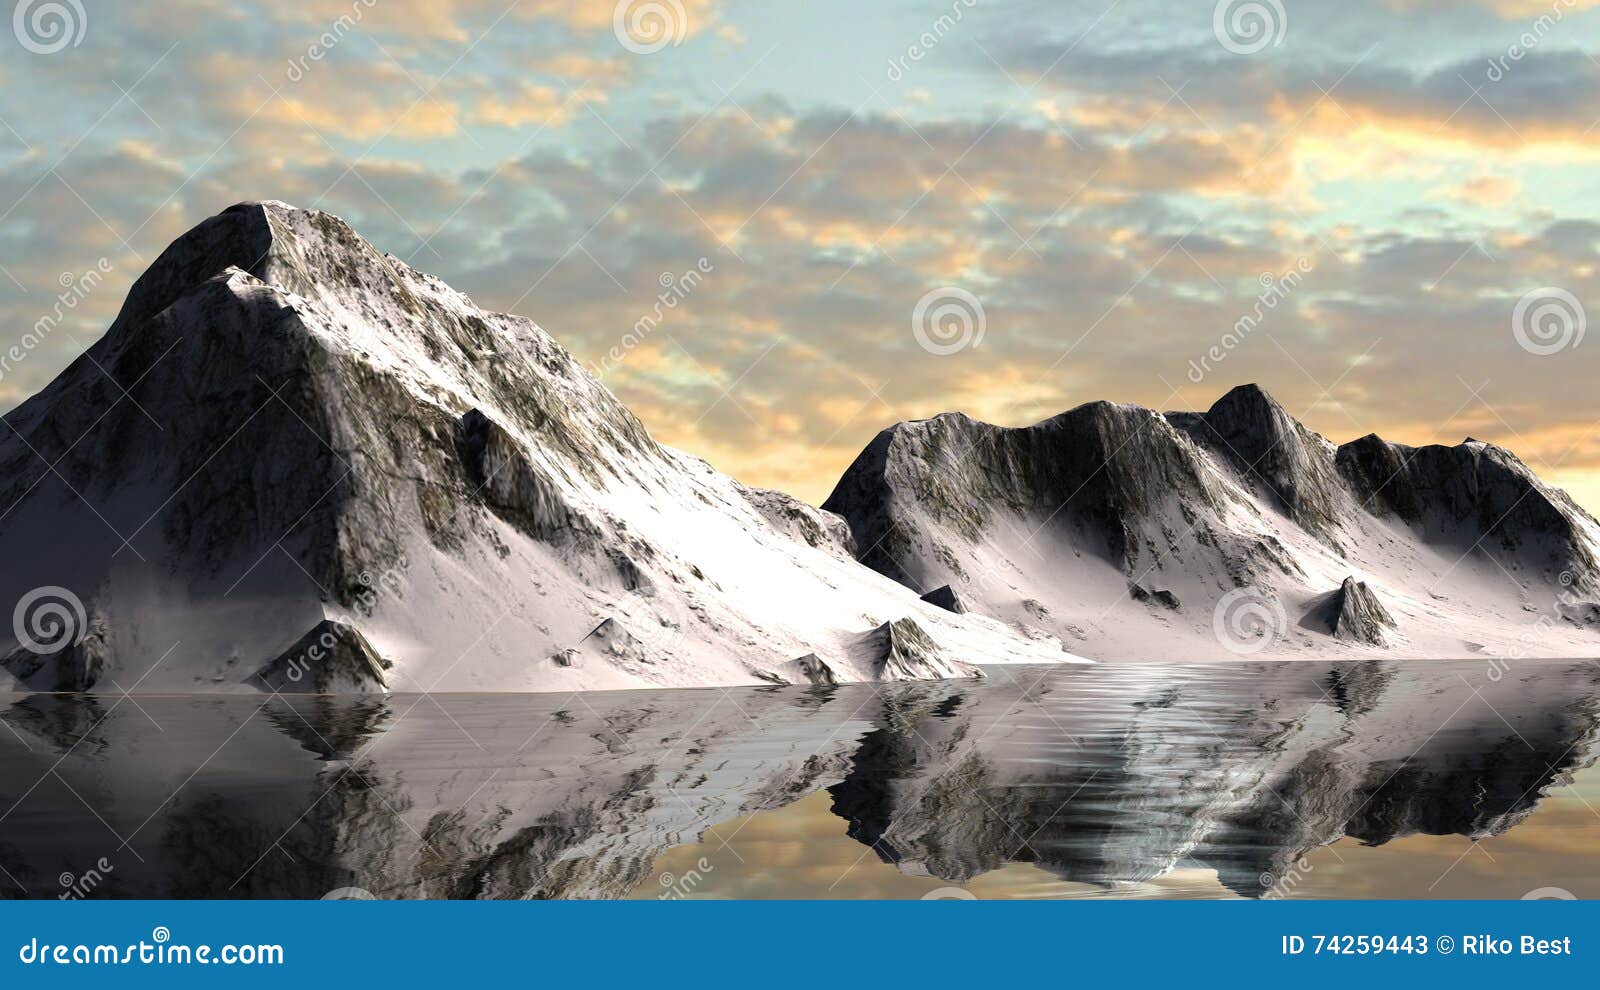 calm waters of a glacier lake with snowy mountains behin